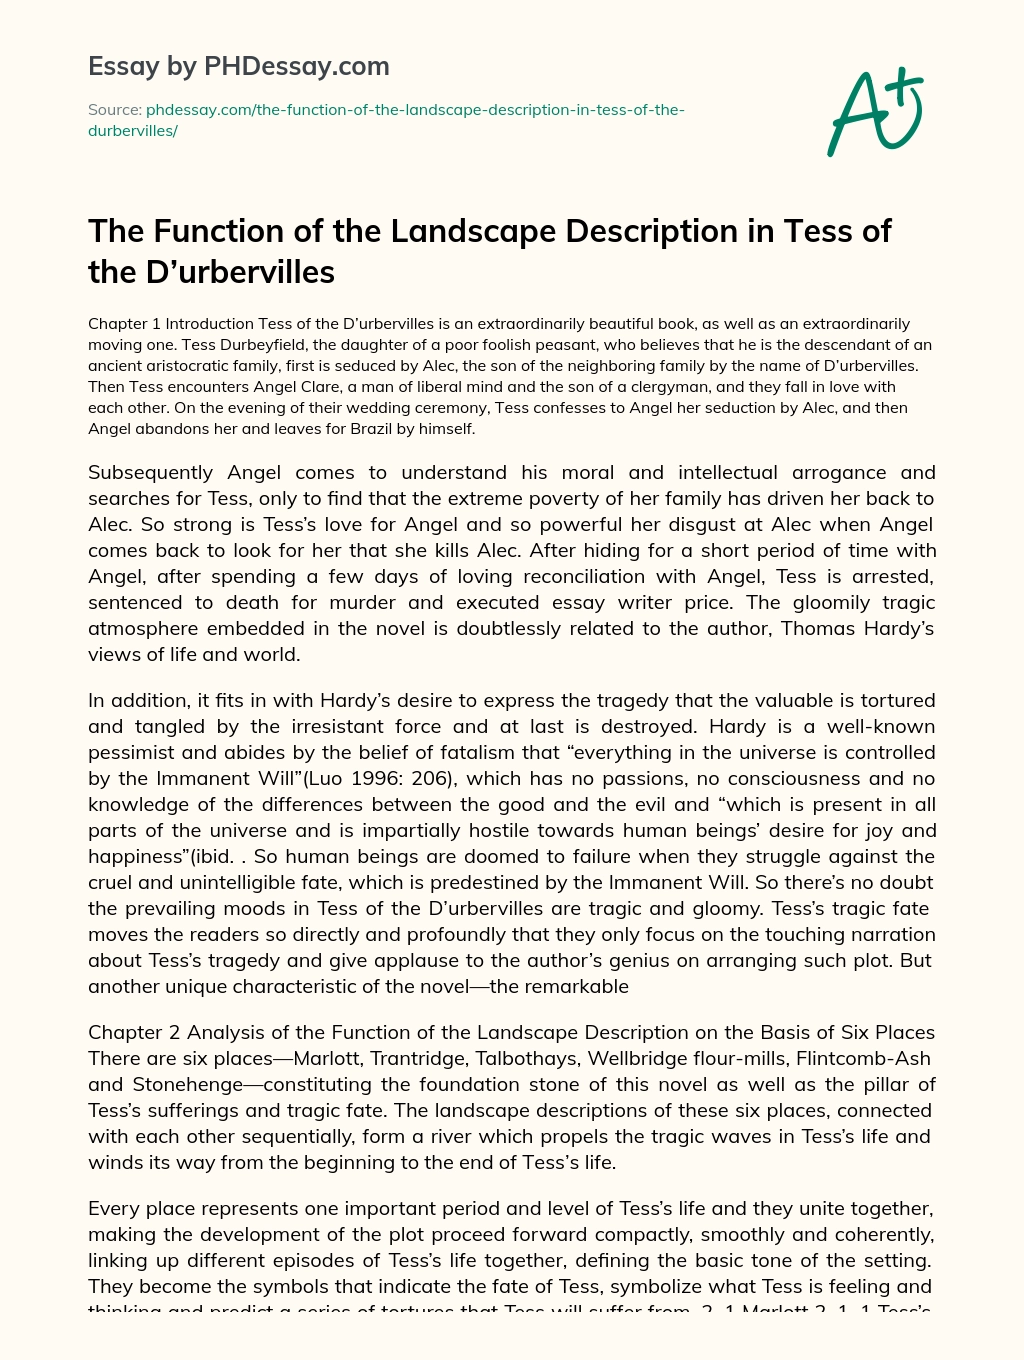 The Function of the Landscape Description in Tess of the D’urbervilles essay